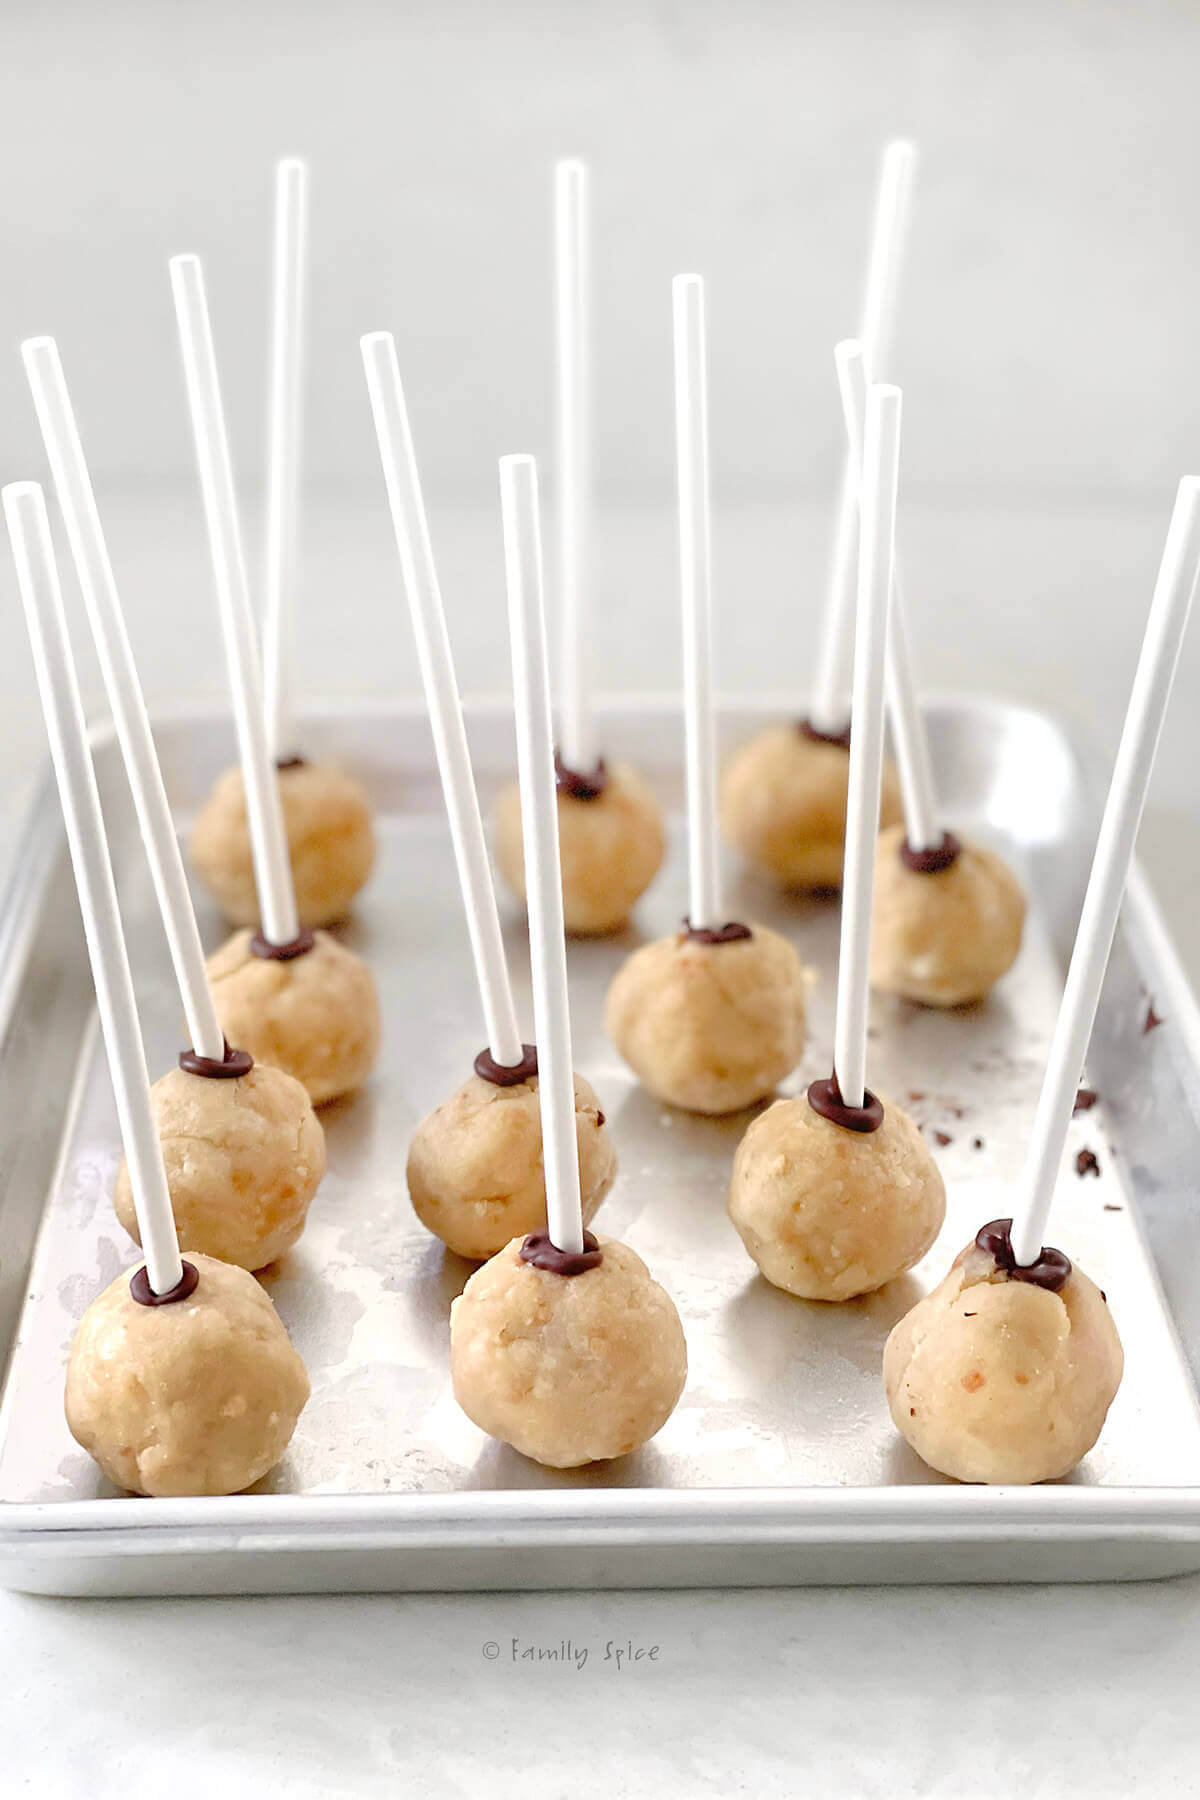 Side view of a small baking tray with cake pops with a lollipop stick inserted into it